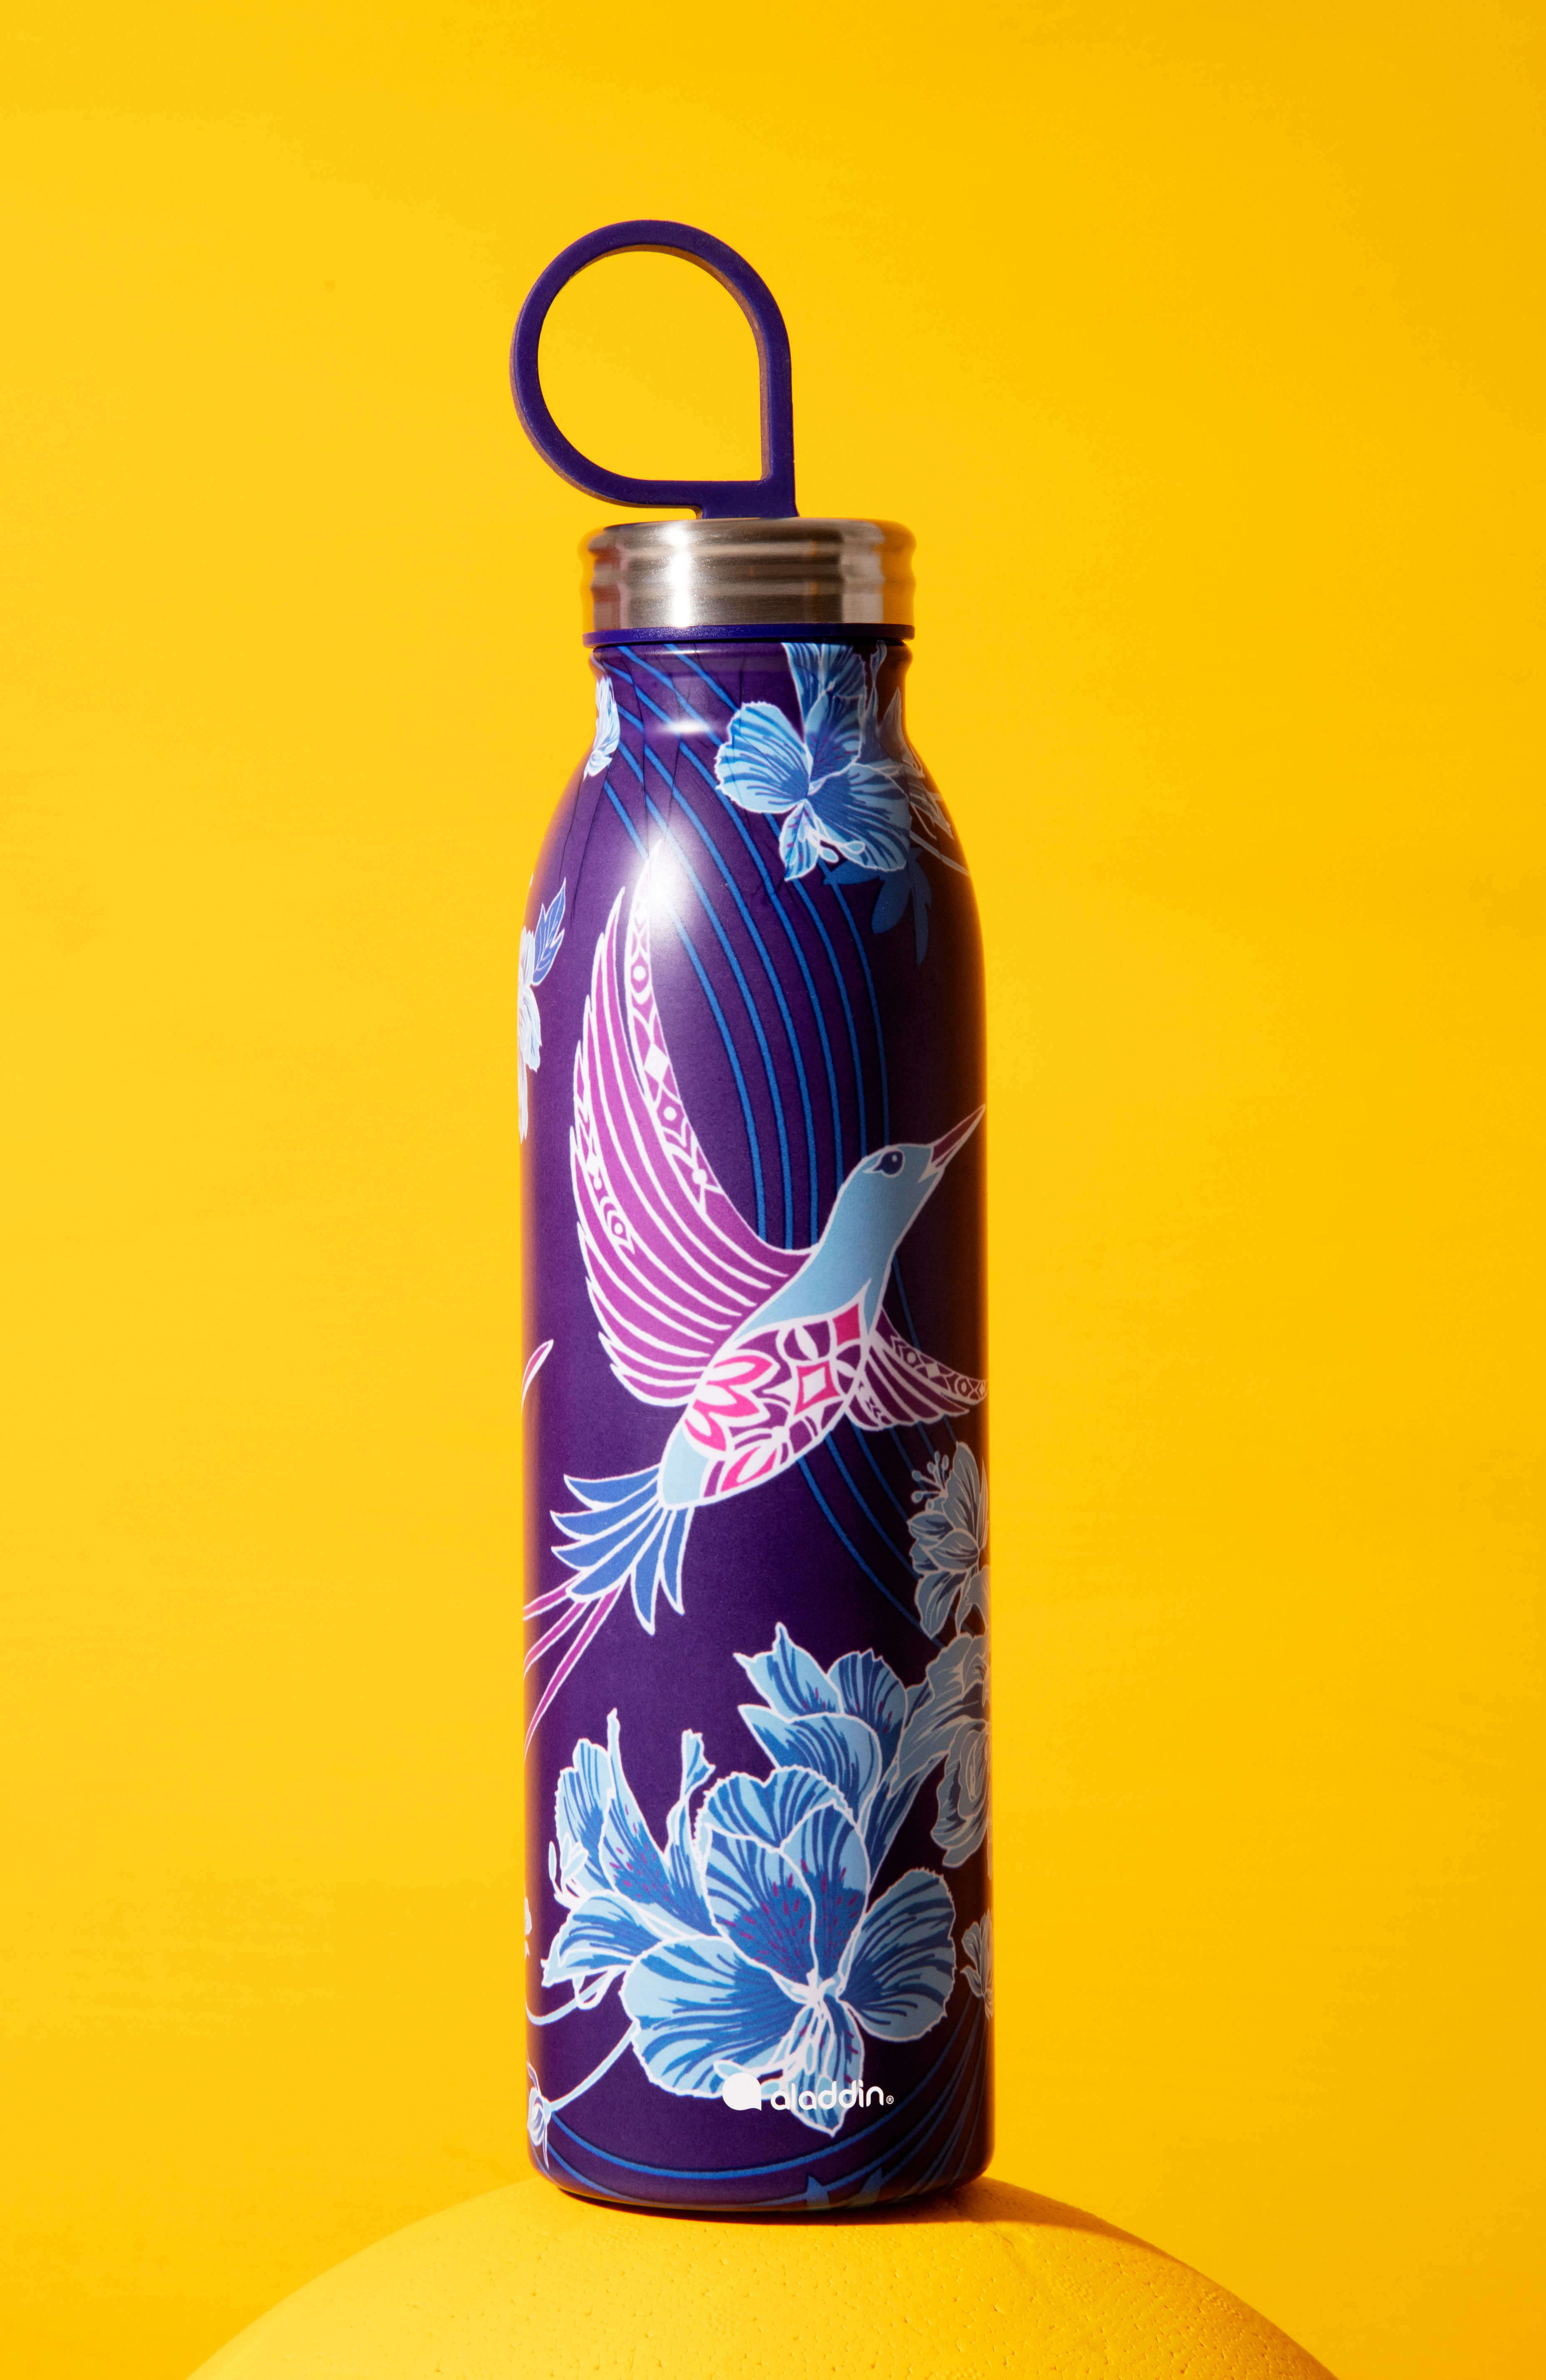 ALADDIN CHILLED THERMAVAC STAINLESS STEEL WATER BOTTLE 0,55 L Aladdin Stainless Steel Water Bottle